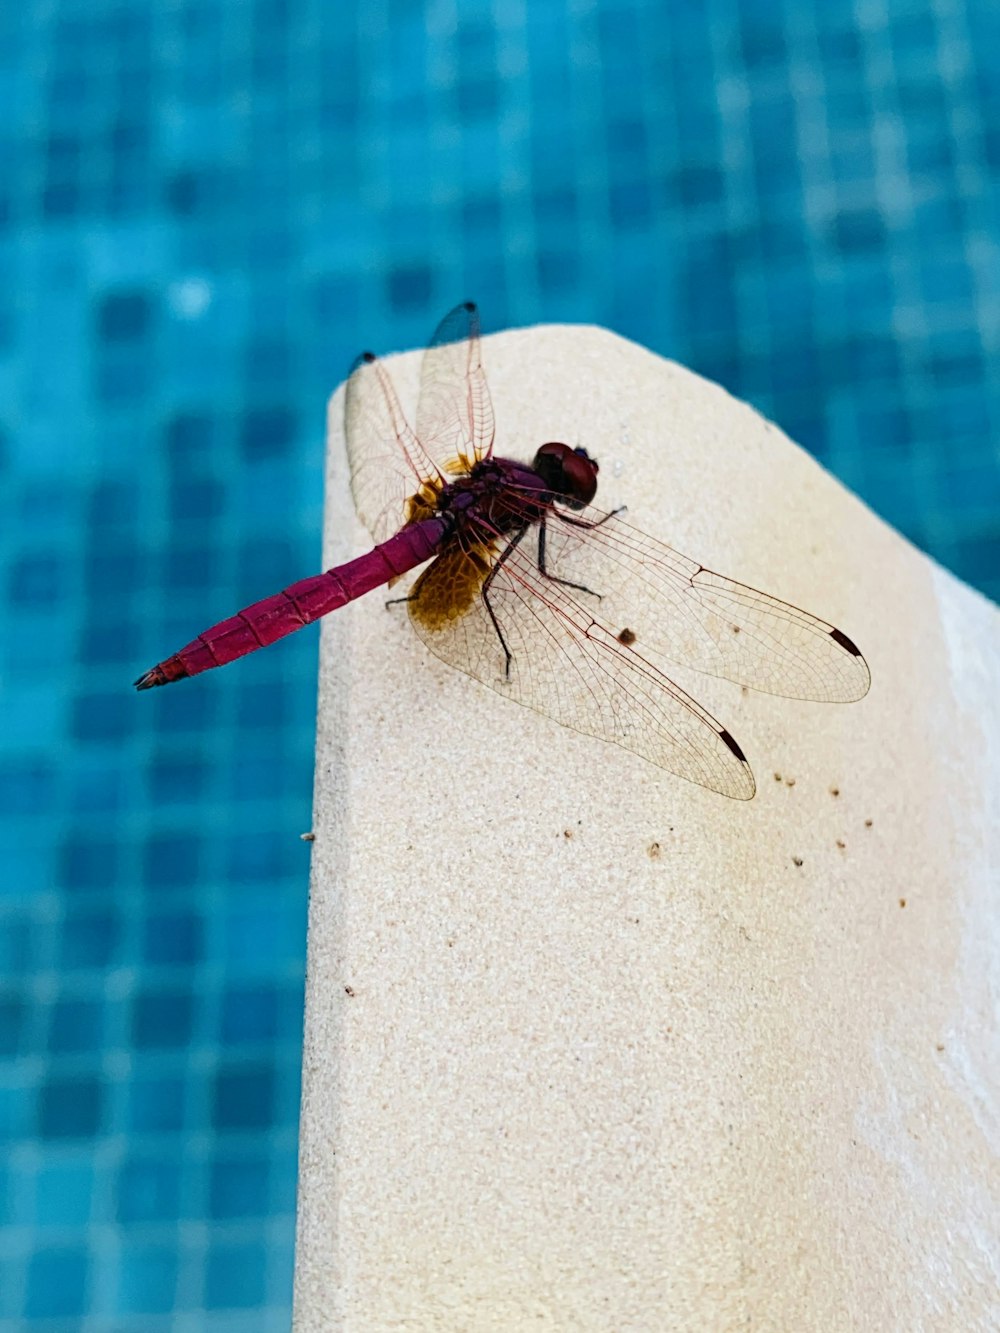 a dragon fly sitting on the edge of a swimming pool